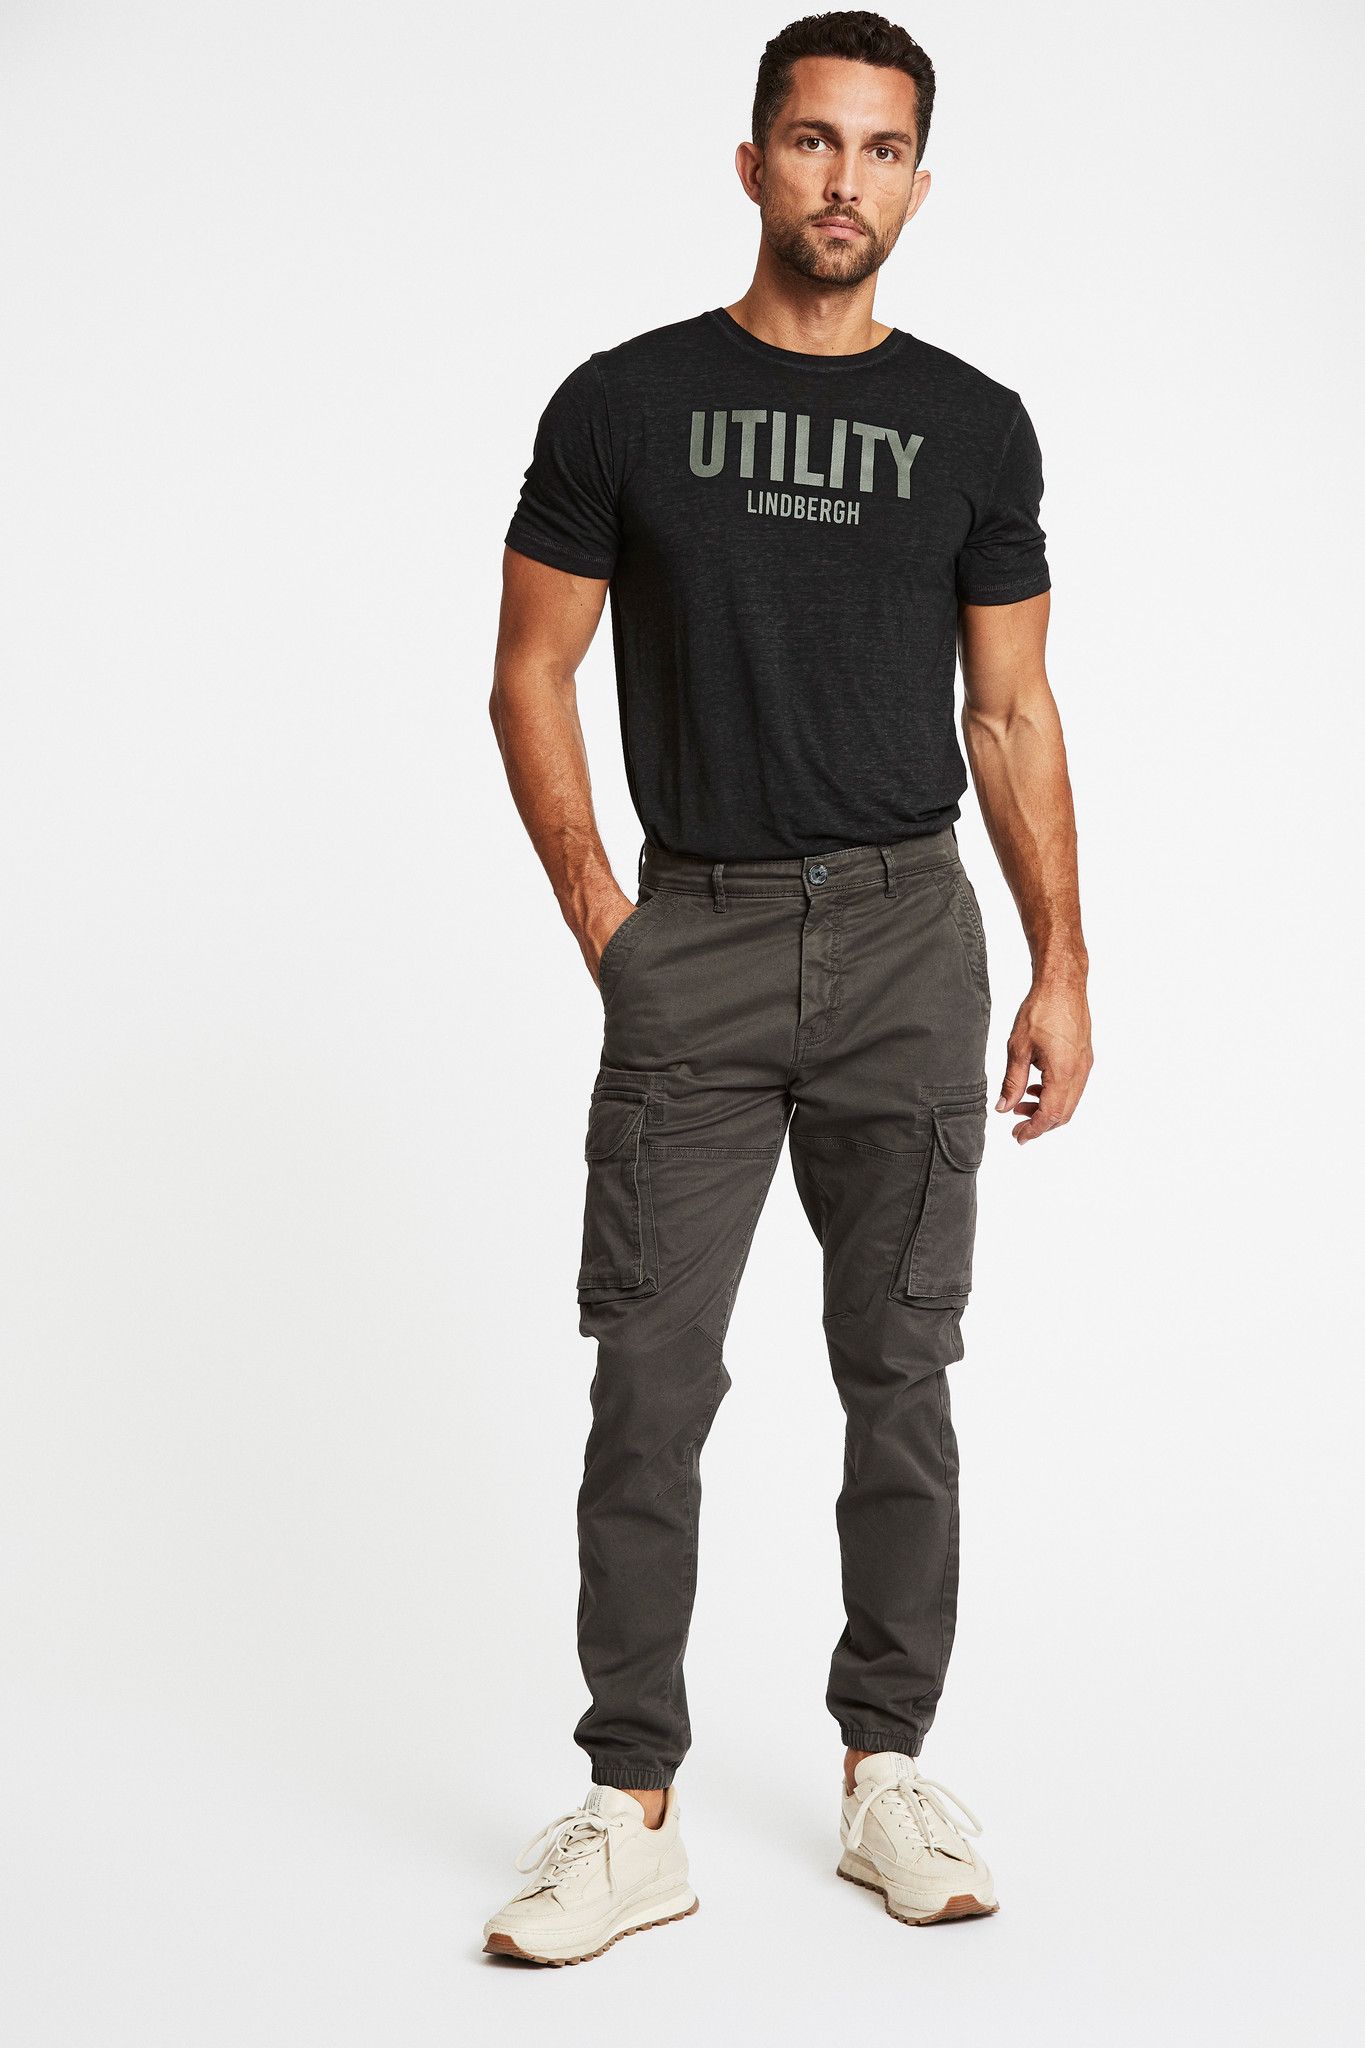 Superflex Cargo Pants: The Ultimate Pants For Comfort And Style